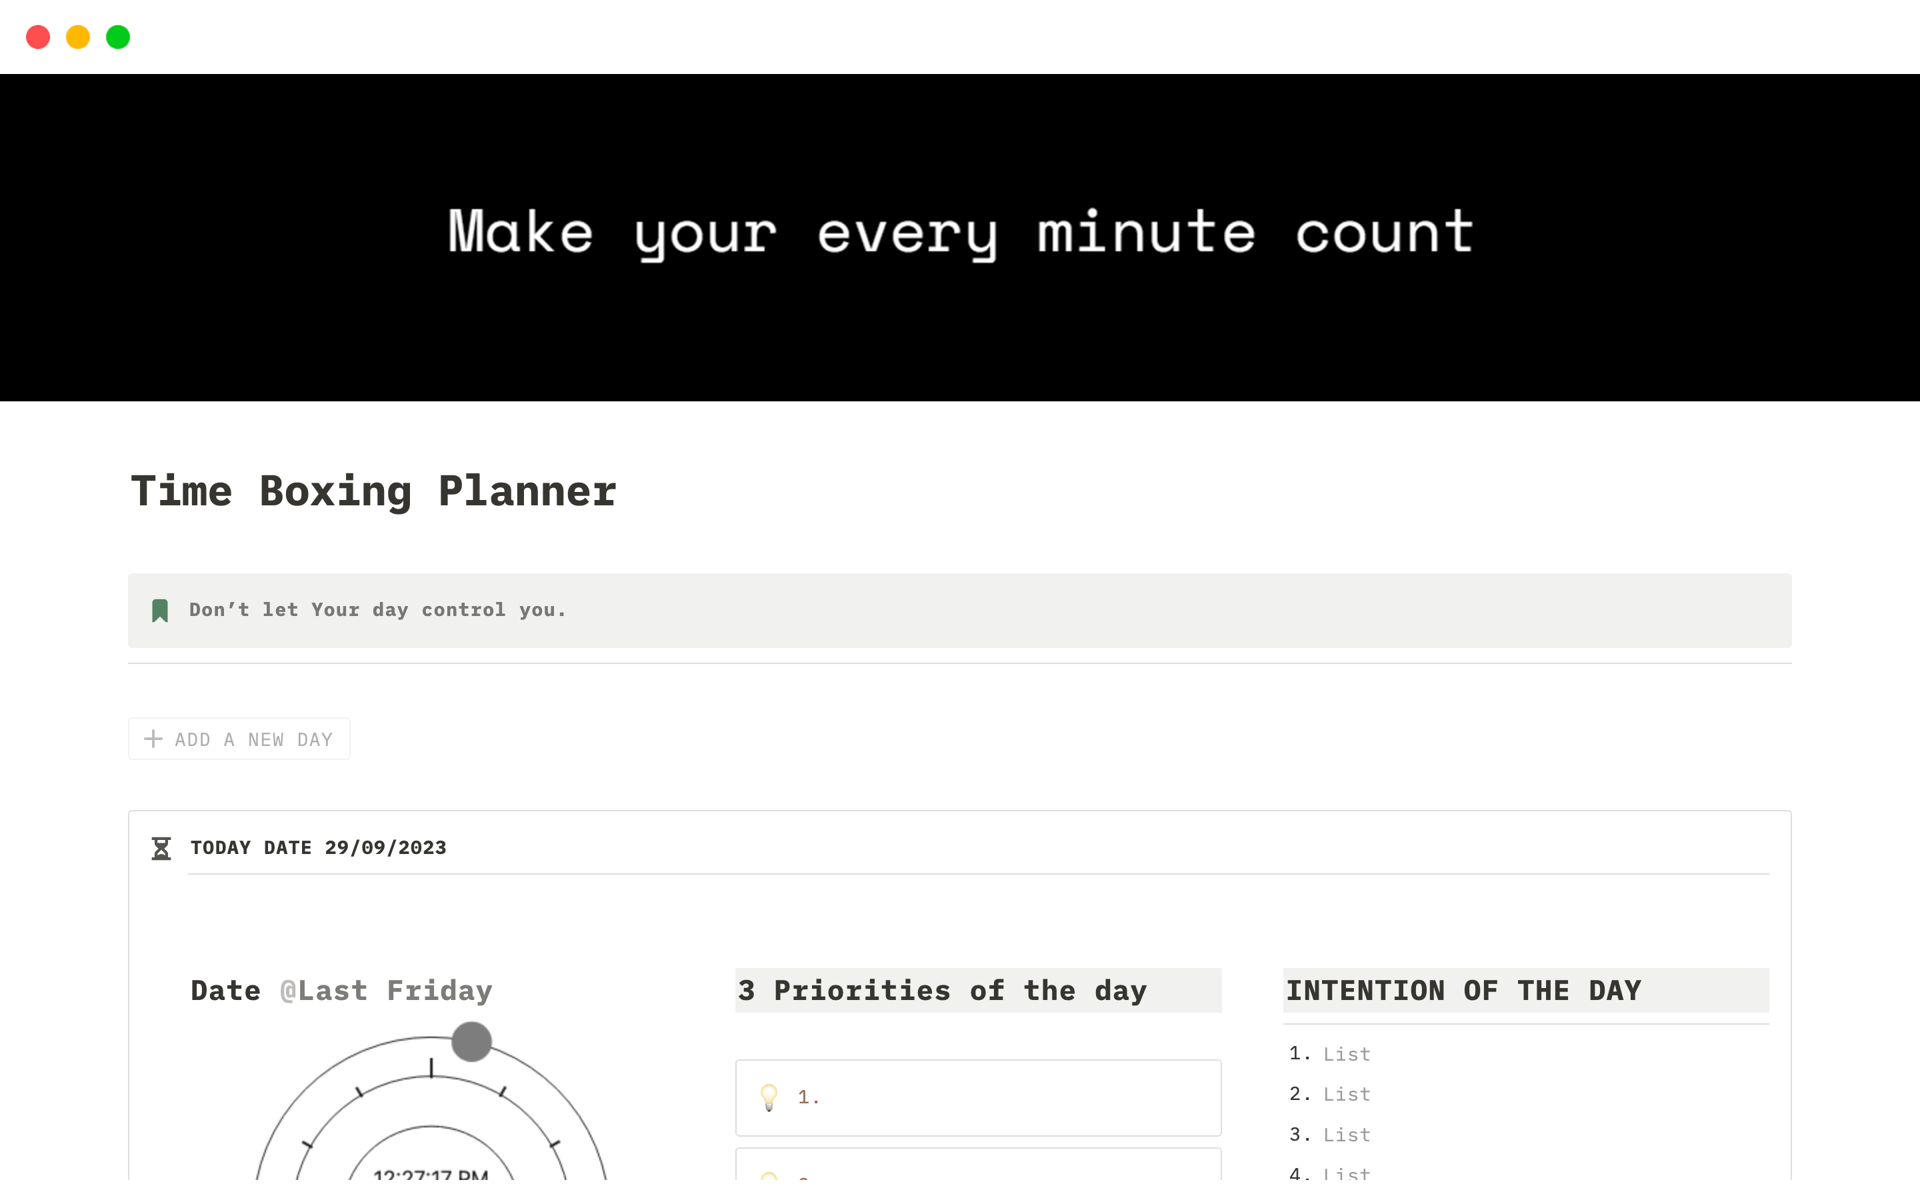 Time Boxing Planner is a template to track every hour of the day and use it wisely. 